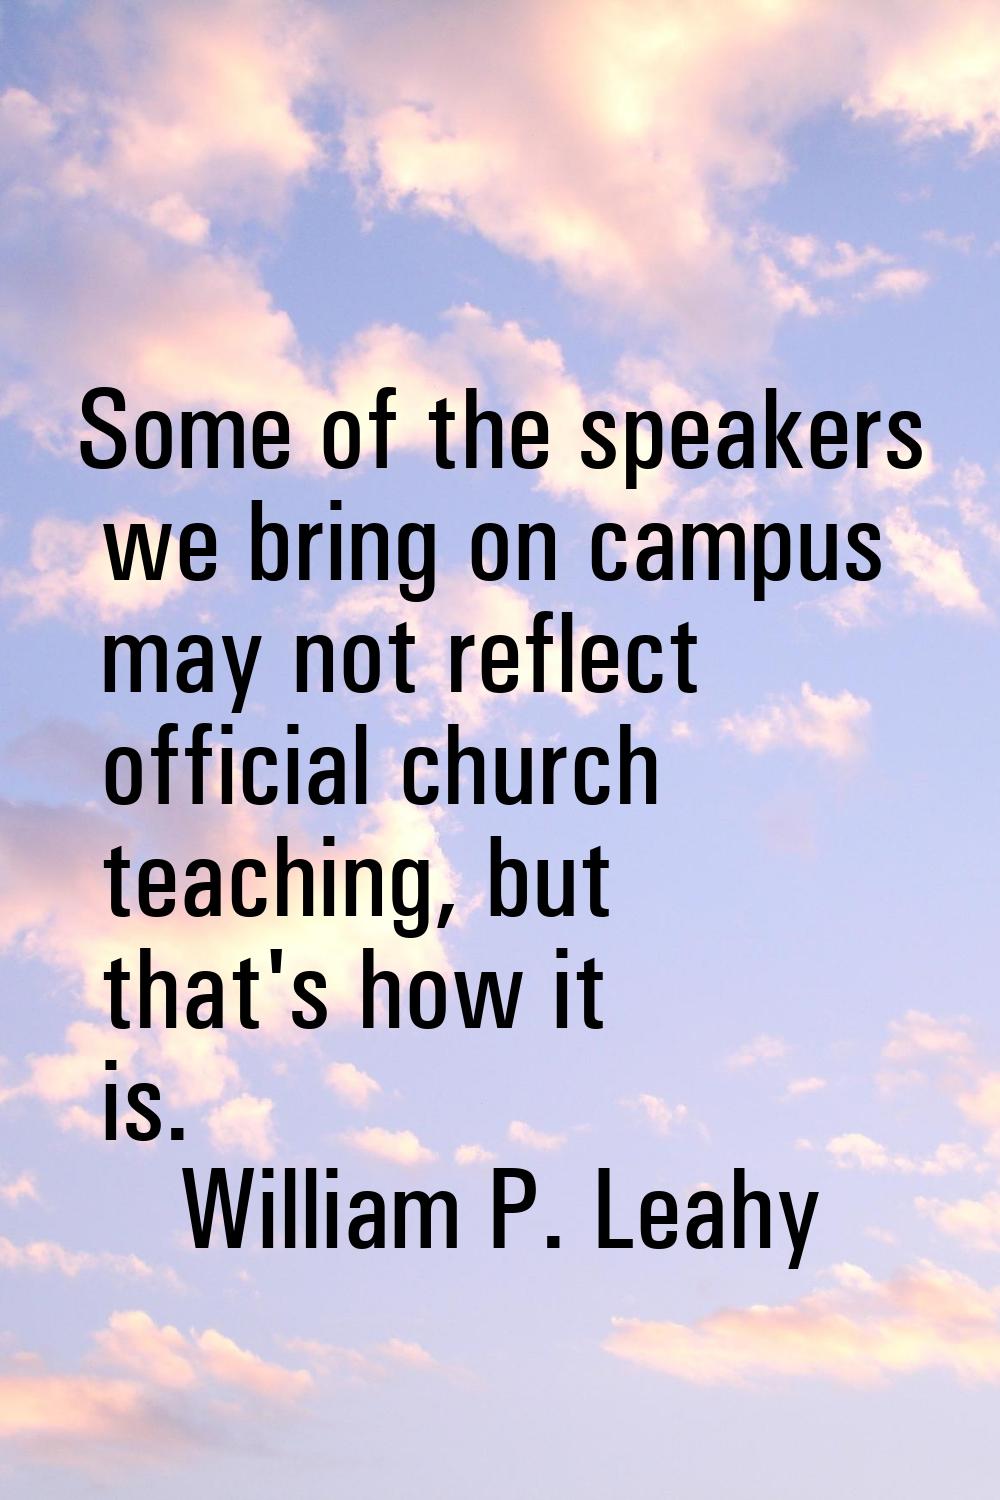 Some of the speakers we bring on campus may not reflect official church teaching, but that's how it